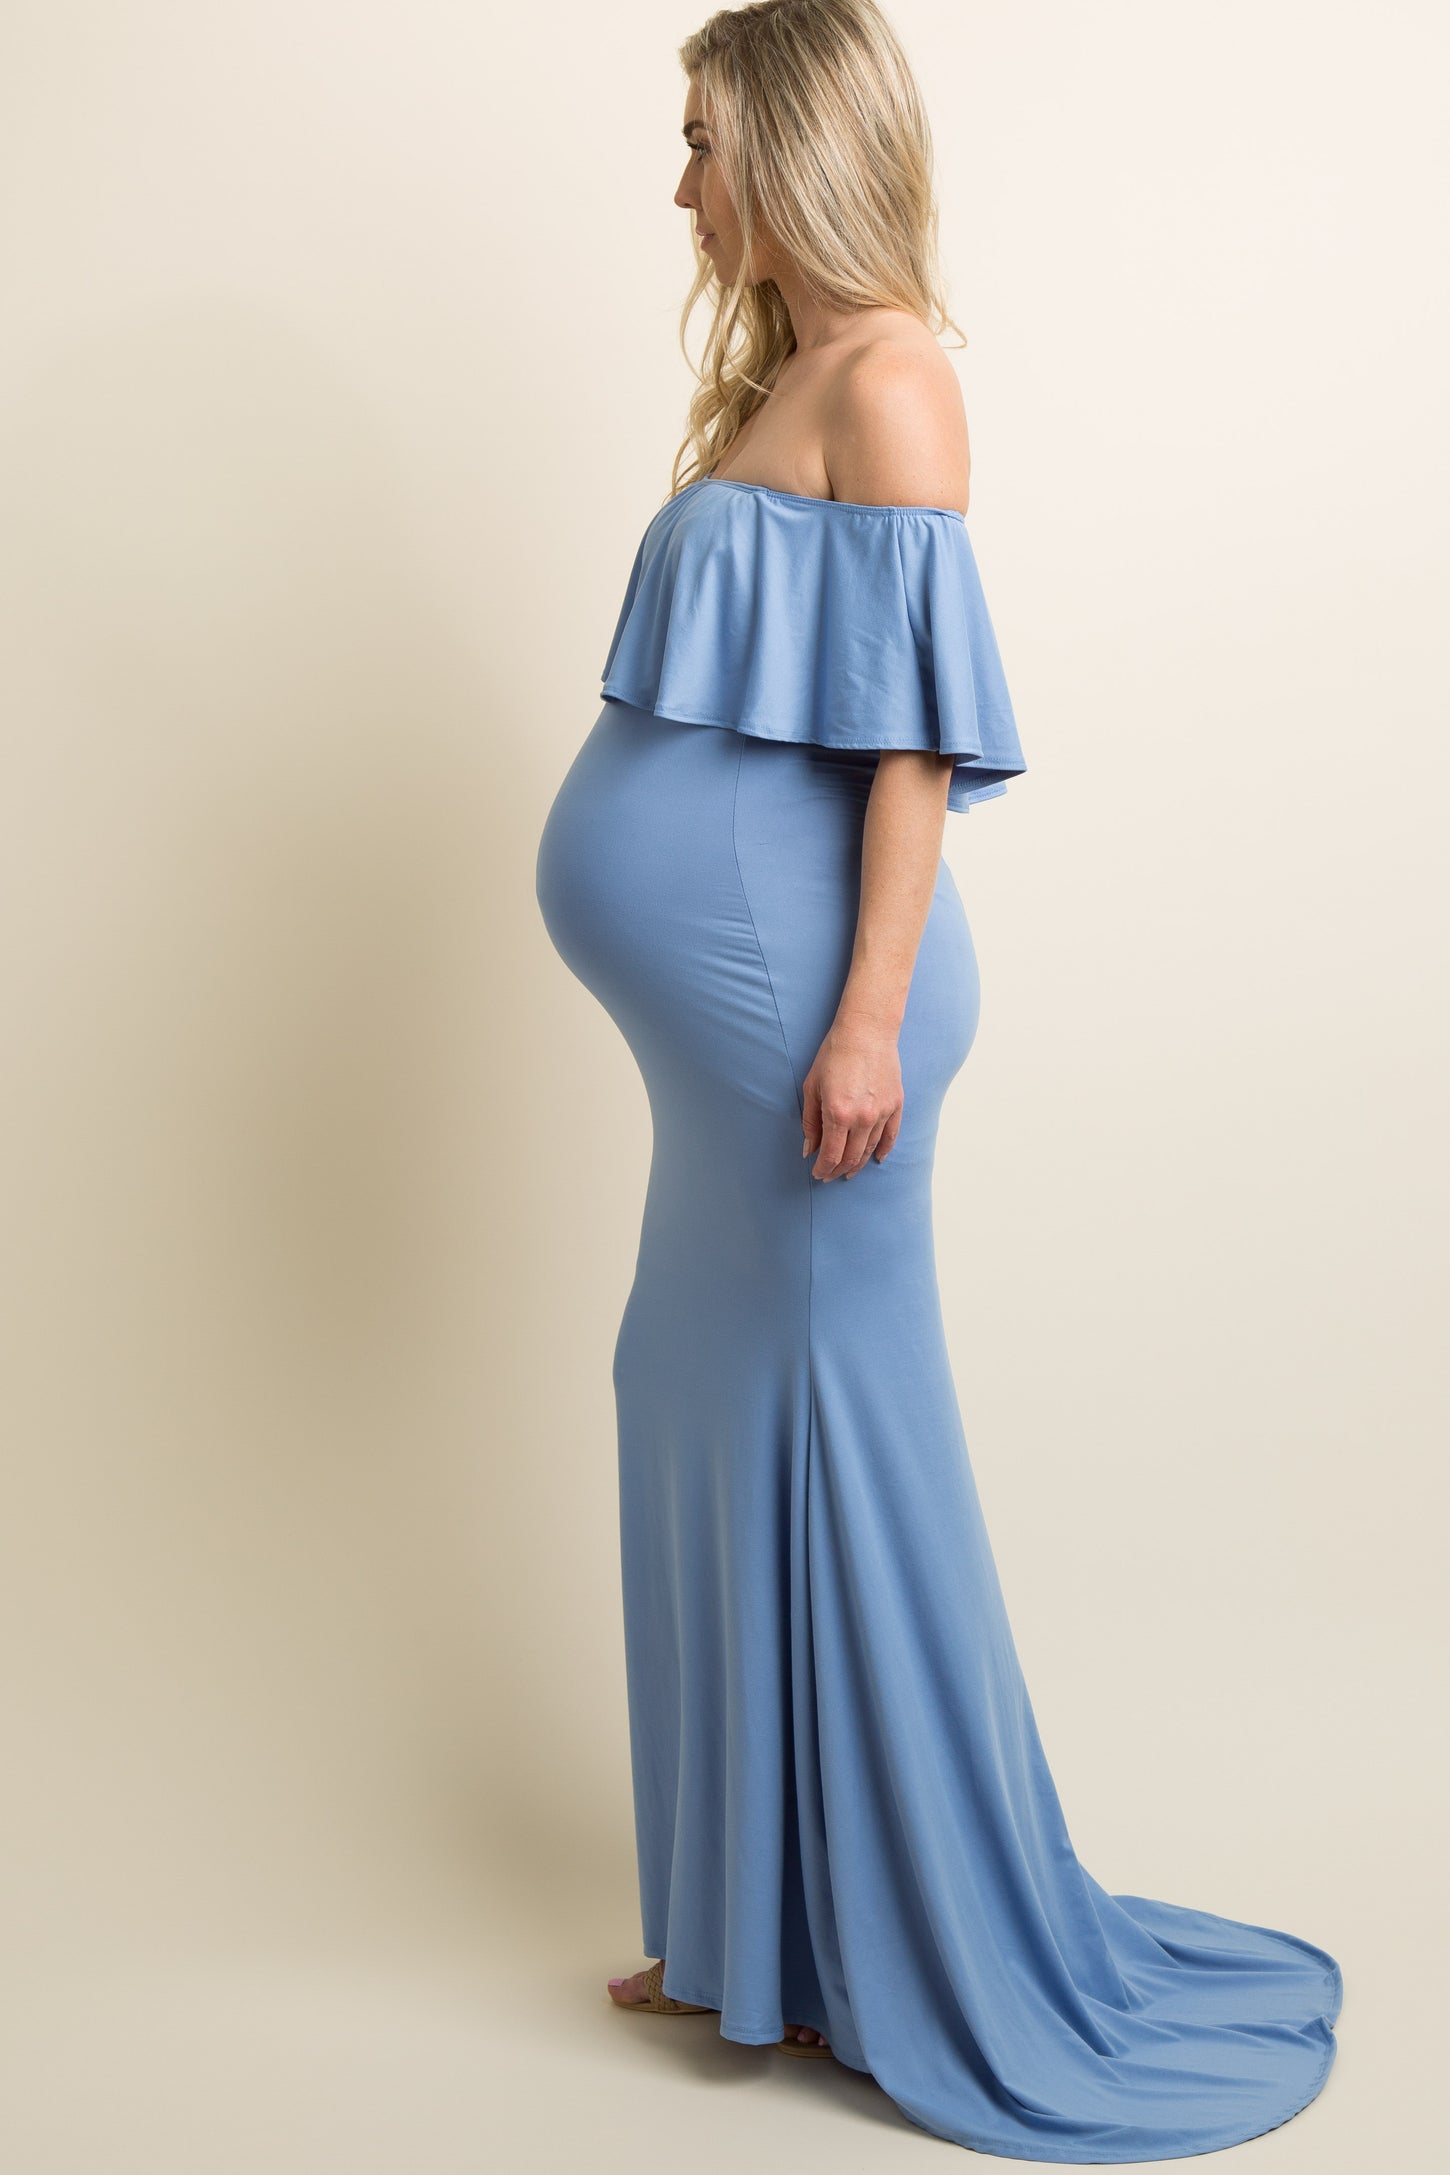 Blue Ruffle Off Shoulder Mermaid Maternity Photoshoot Gown/Dress ...